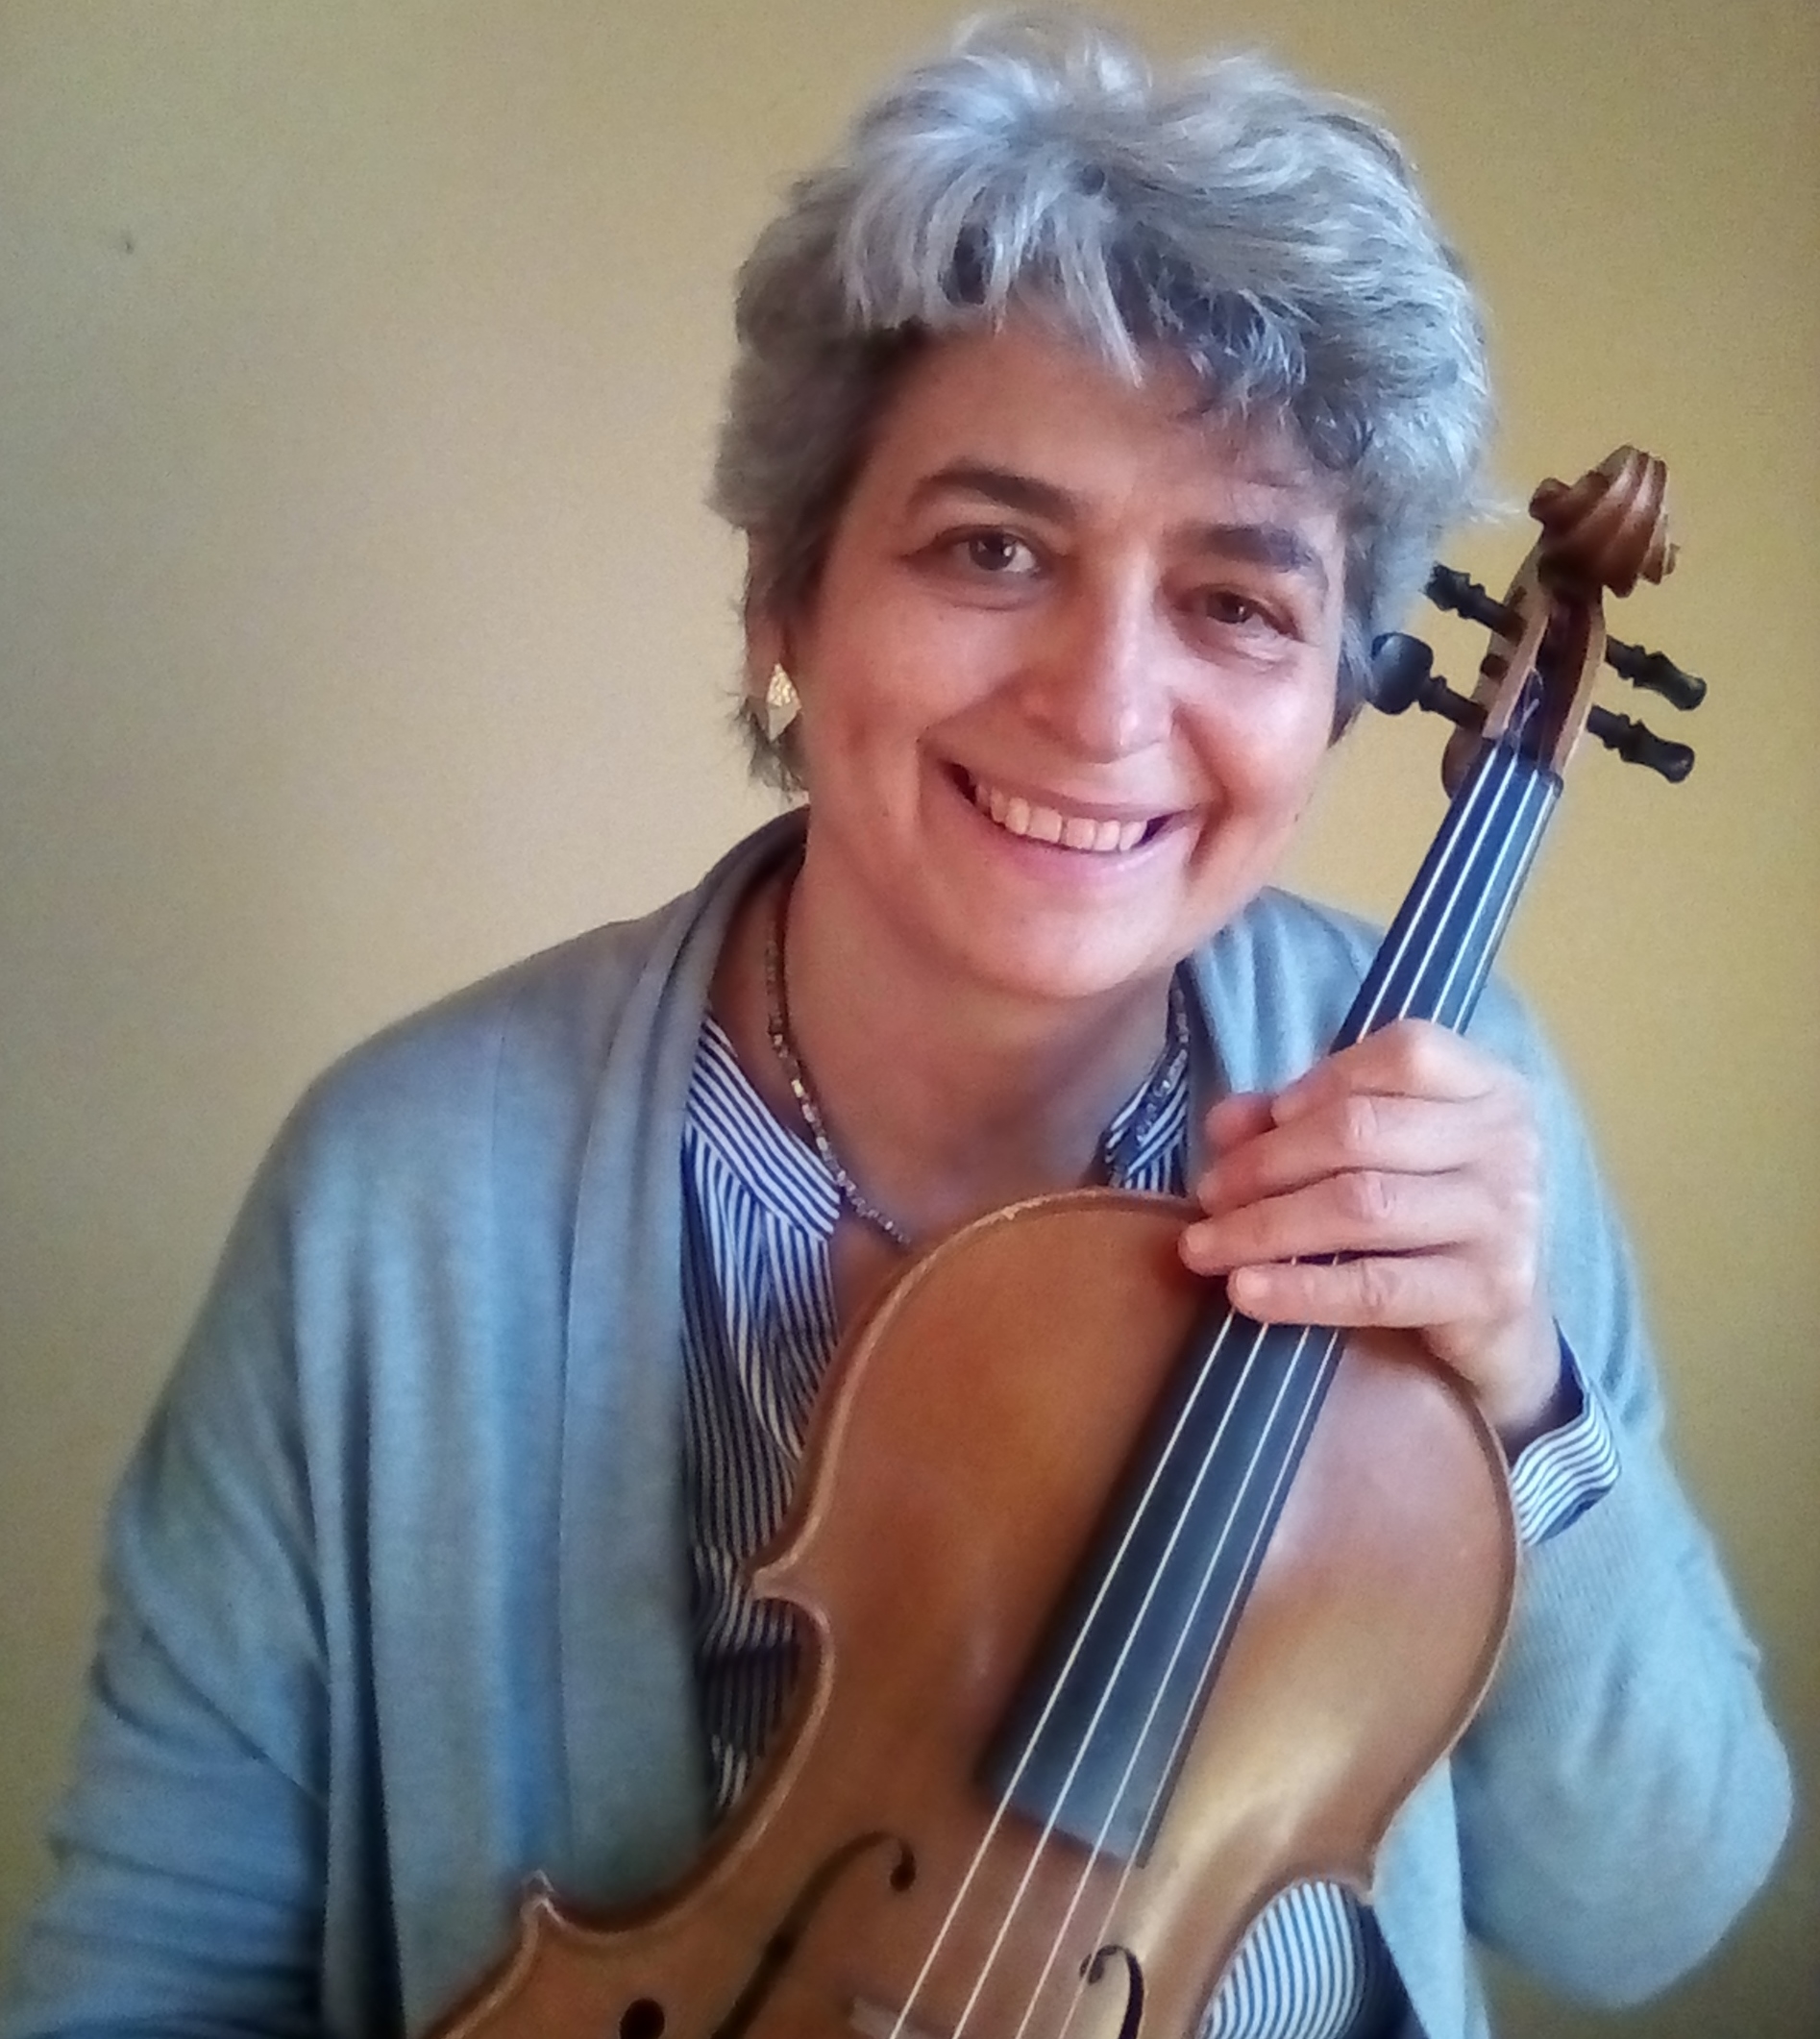 Monica Cuneo helps violin and viola players play free from pain, injuries and stage fright